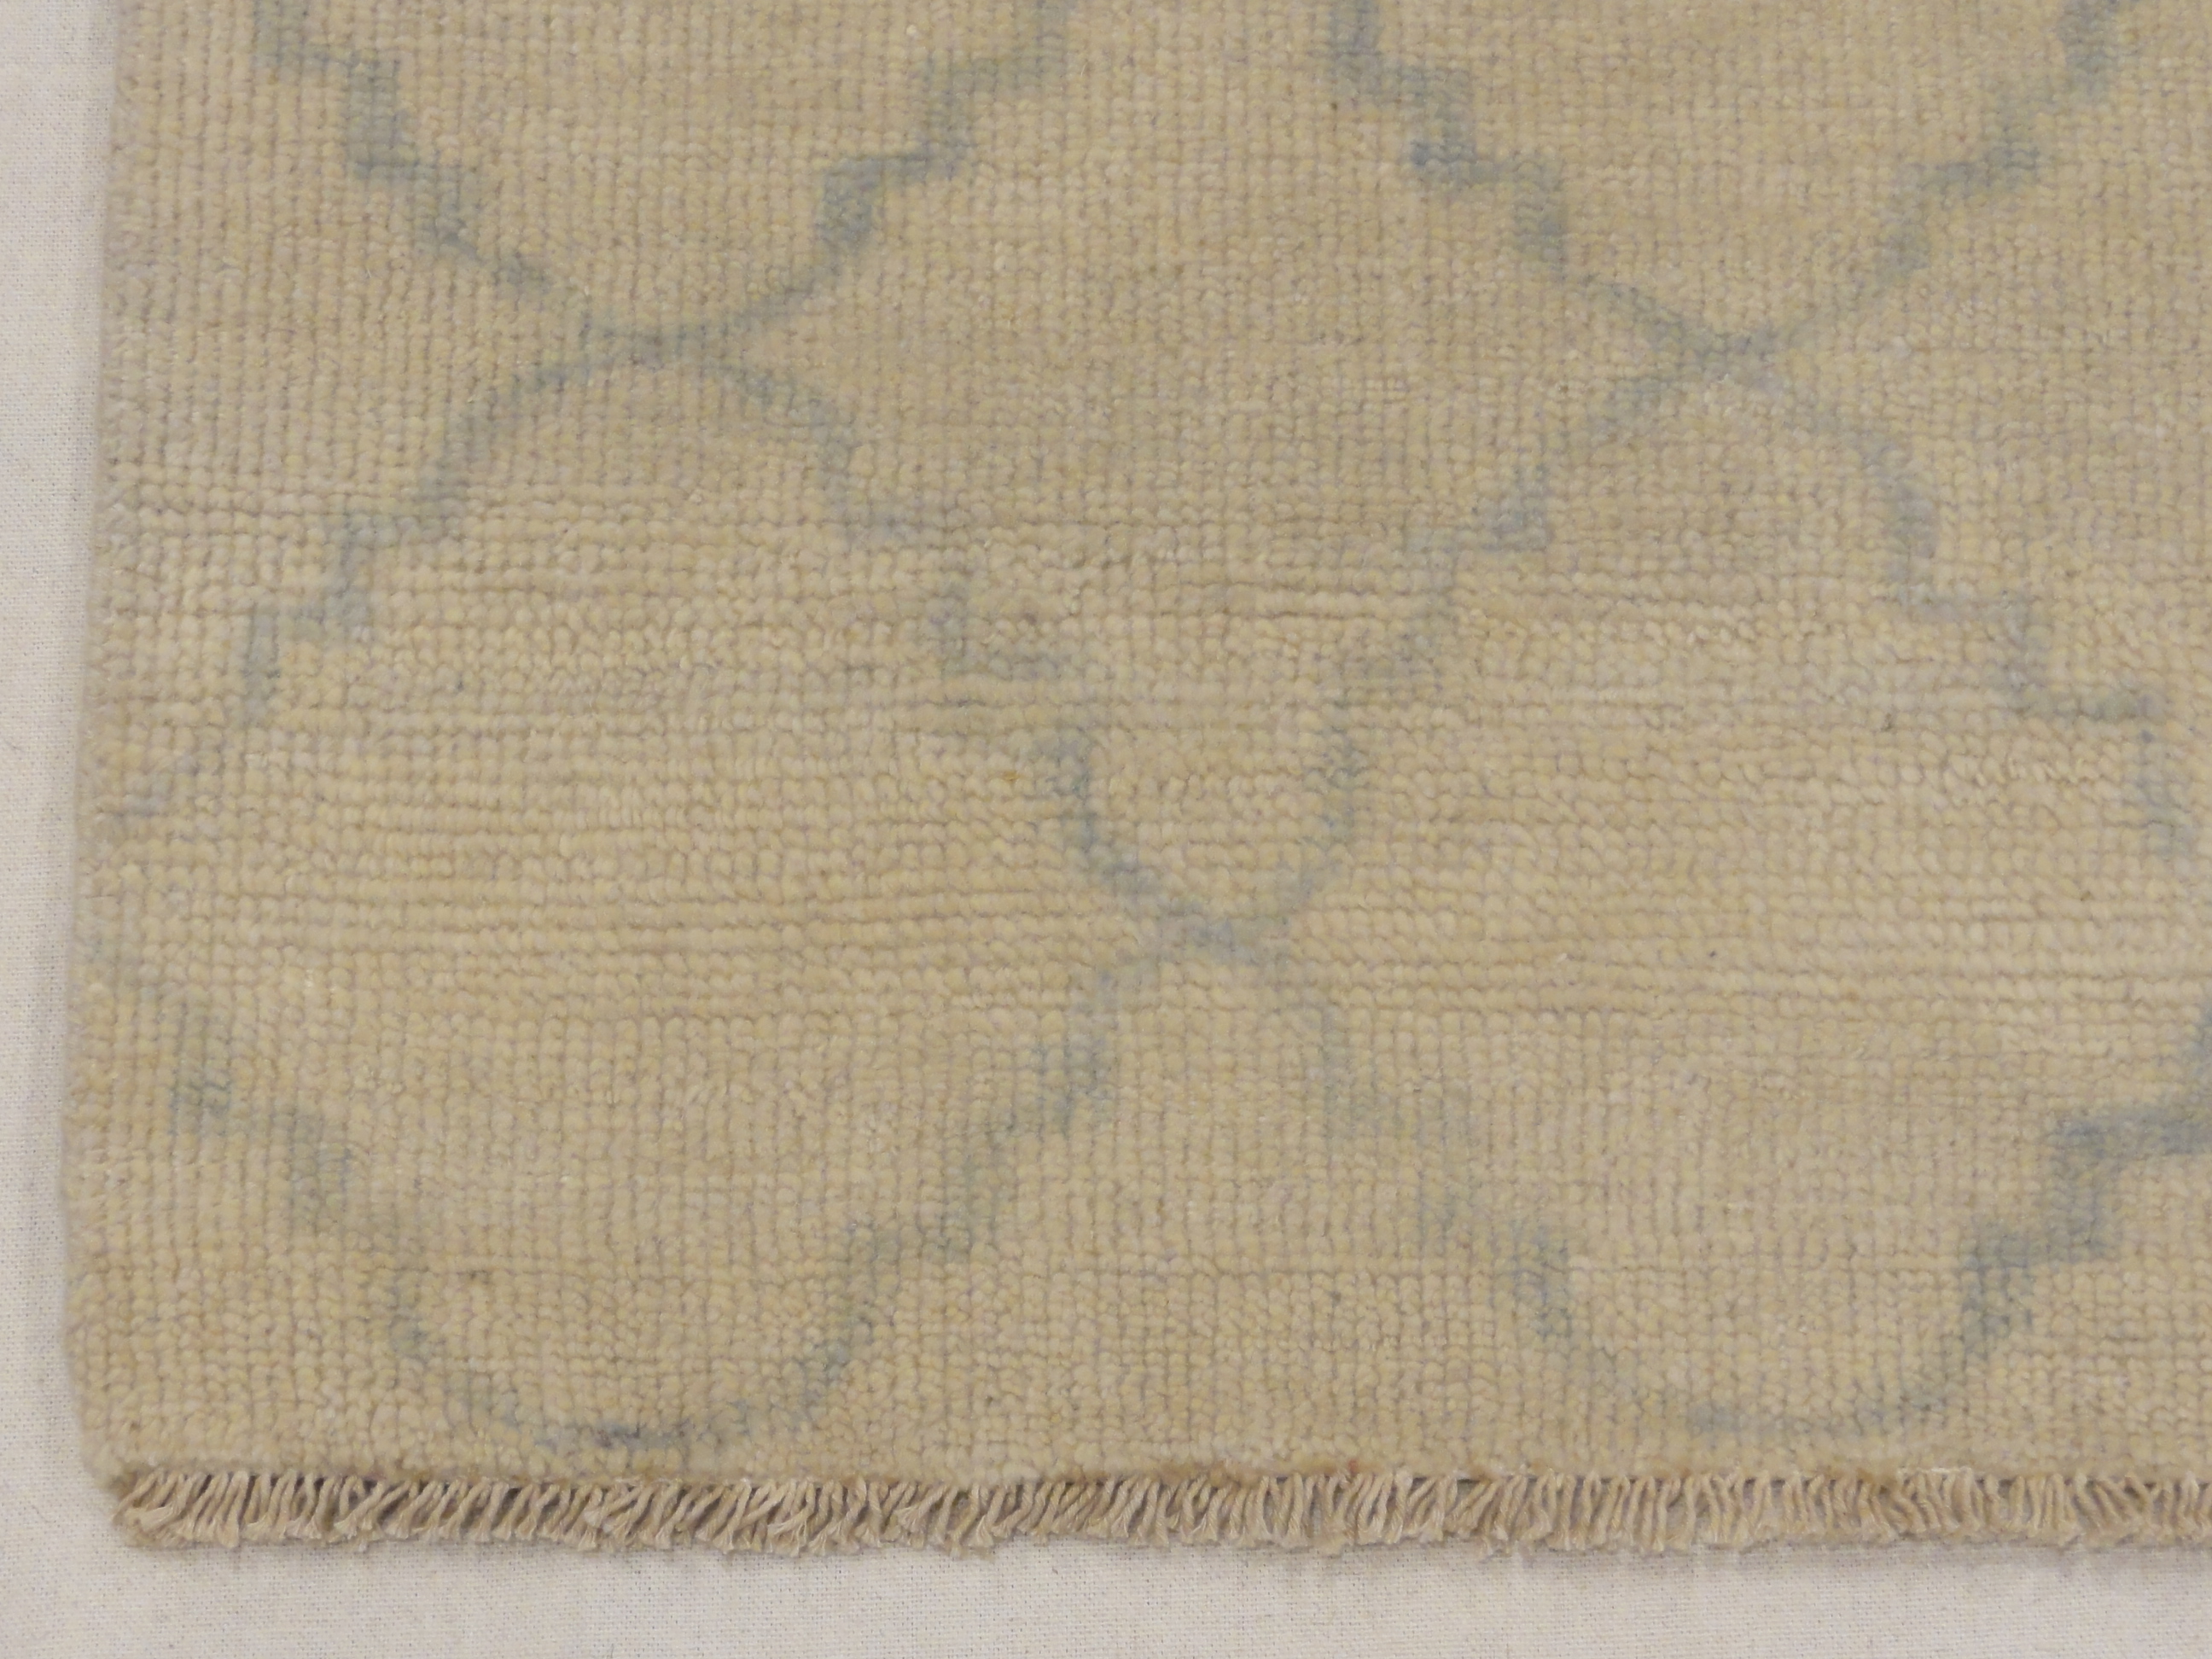 Fine Modern Blue and Beige Trellises Rug. A piece of woven authentic carpet art sold by Santa Barbara Design Center, Rugs and More. Fine Modern Blue and Beige Trellises Rug. A piece of woven authentic carpet art sold by Santa Barbara Design Center, Rugs and More.